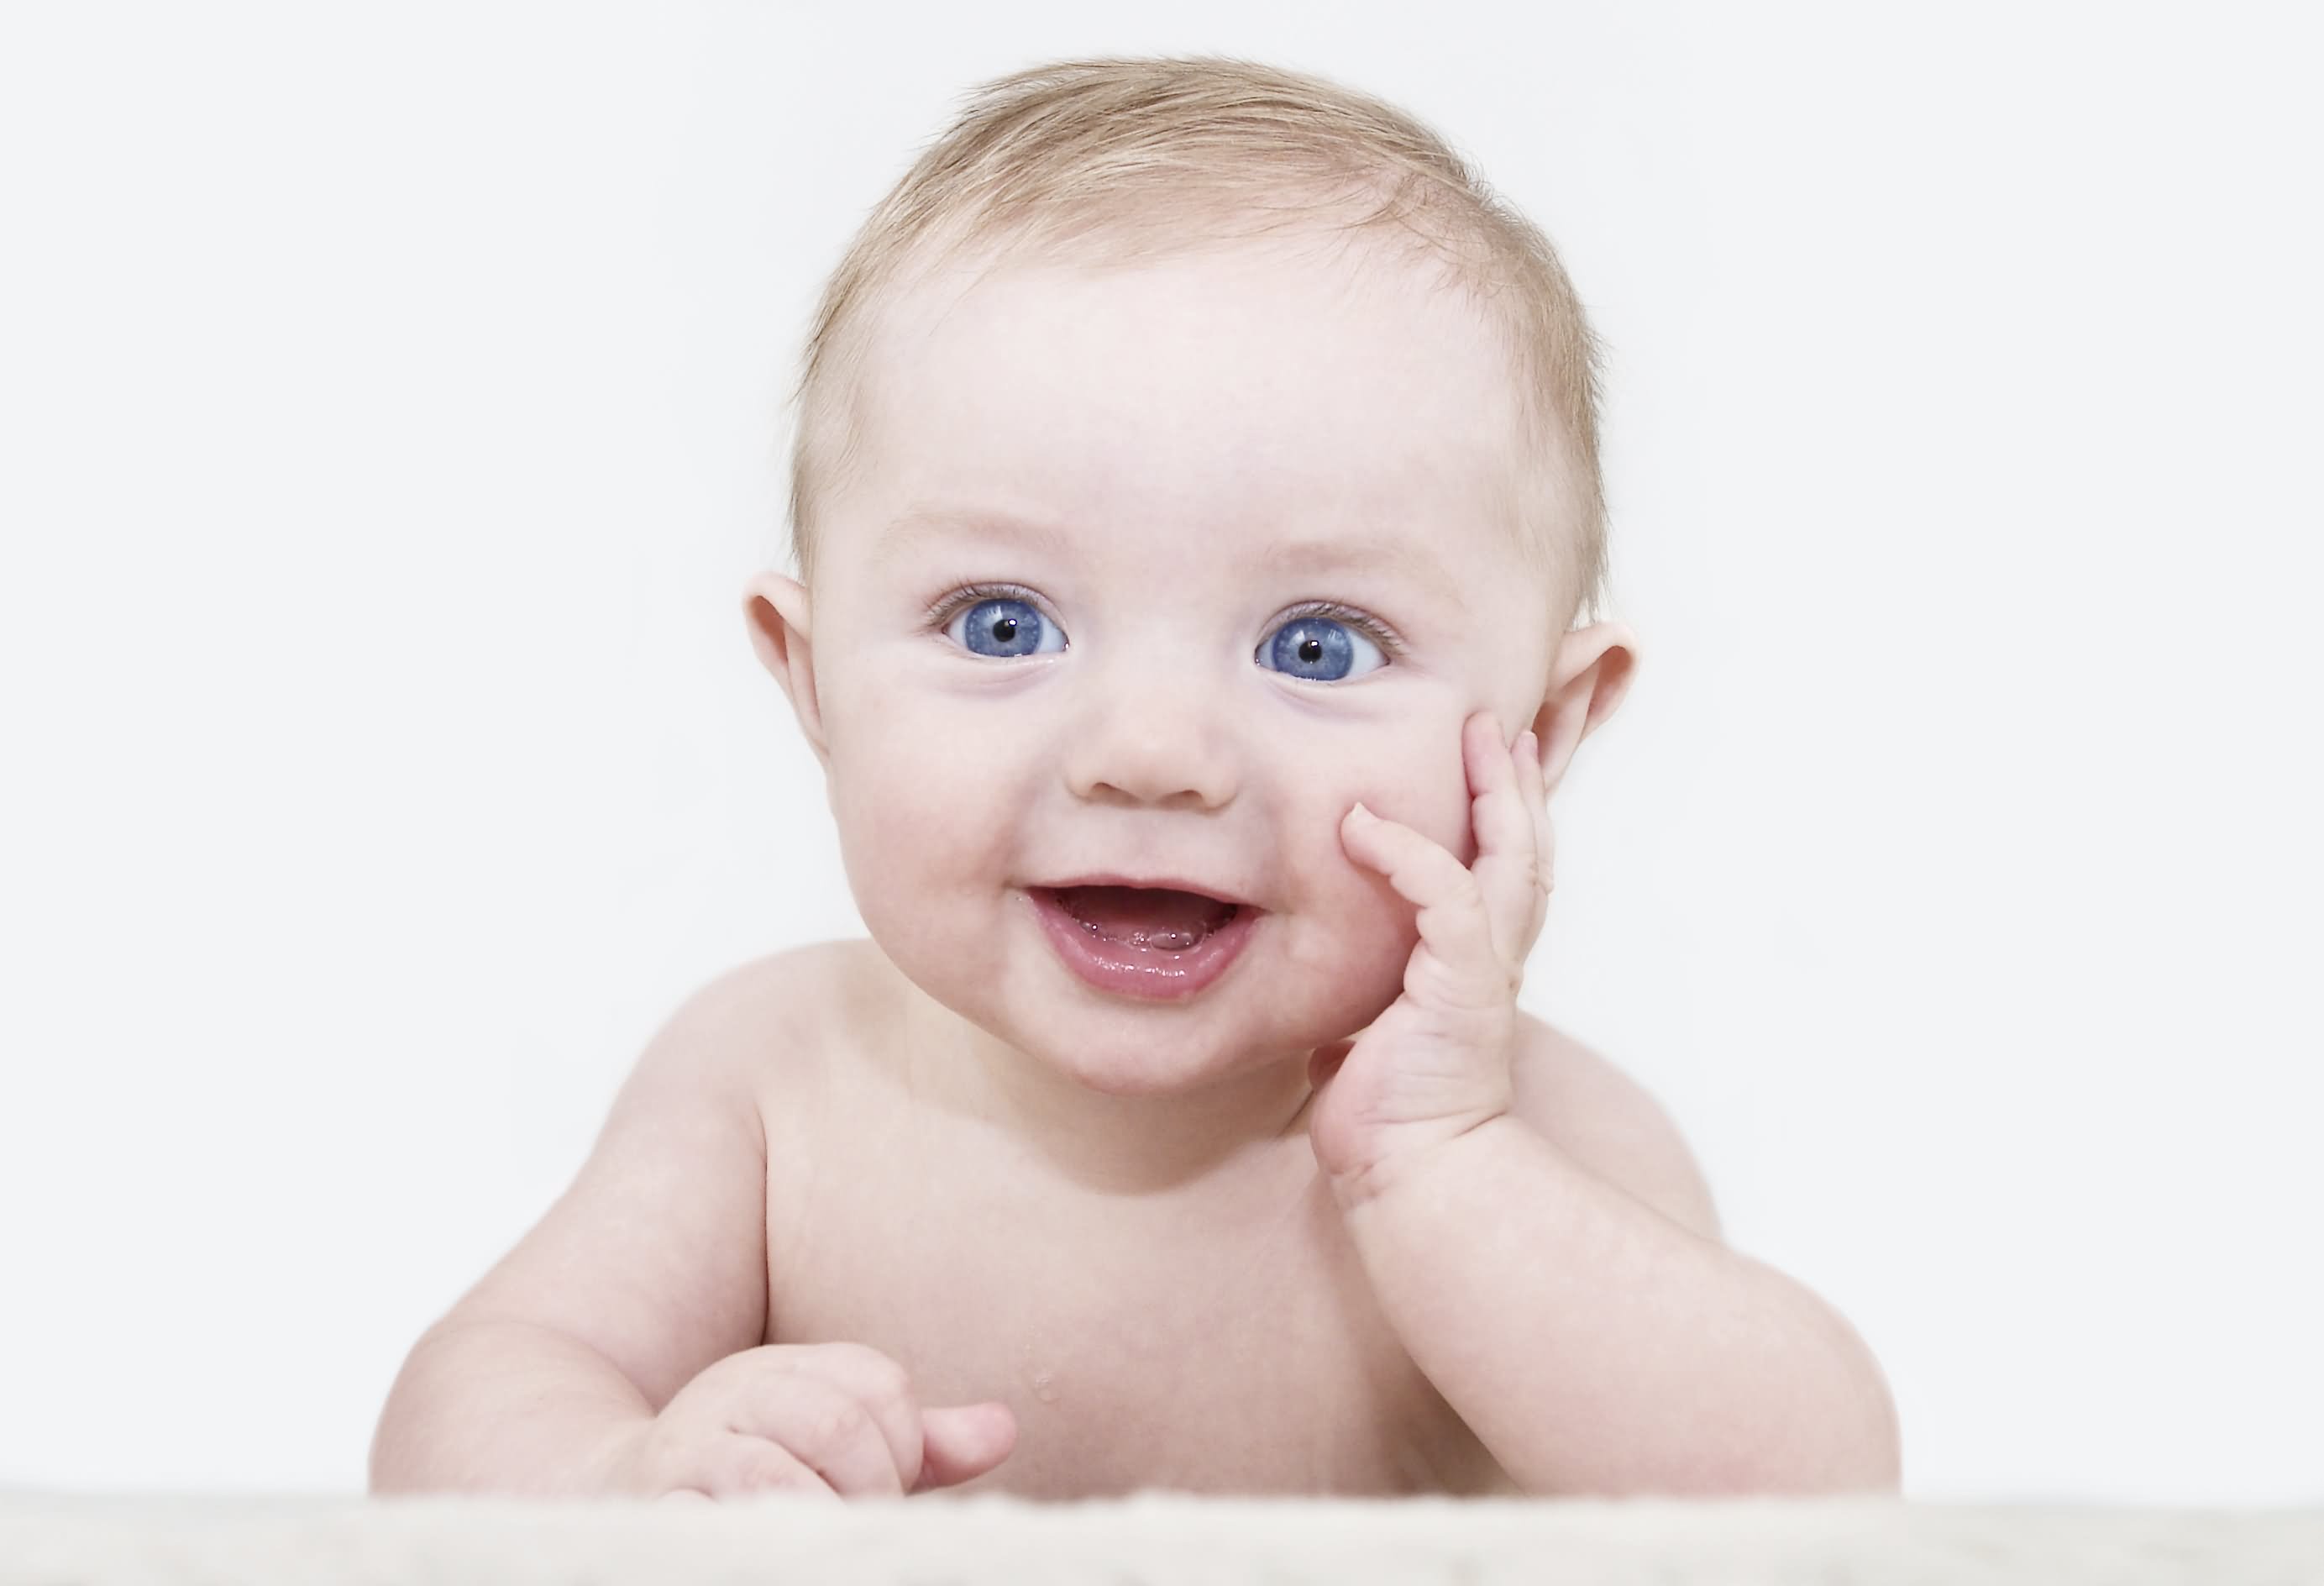 Sweet Baby With Blue Eyes Posing For Photograph